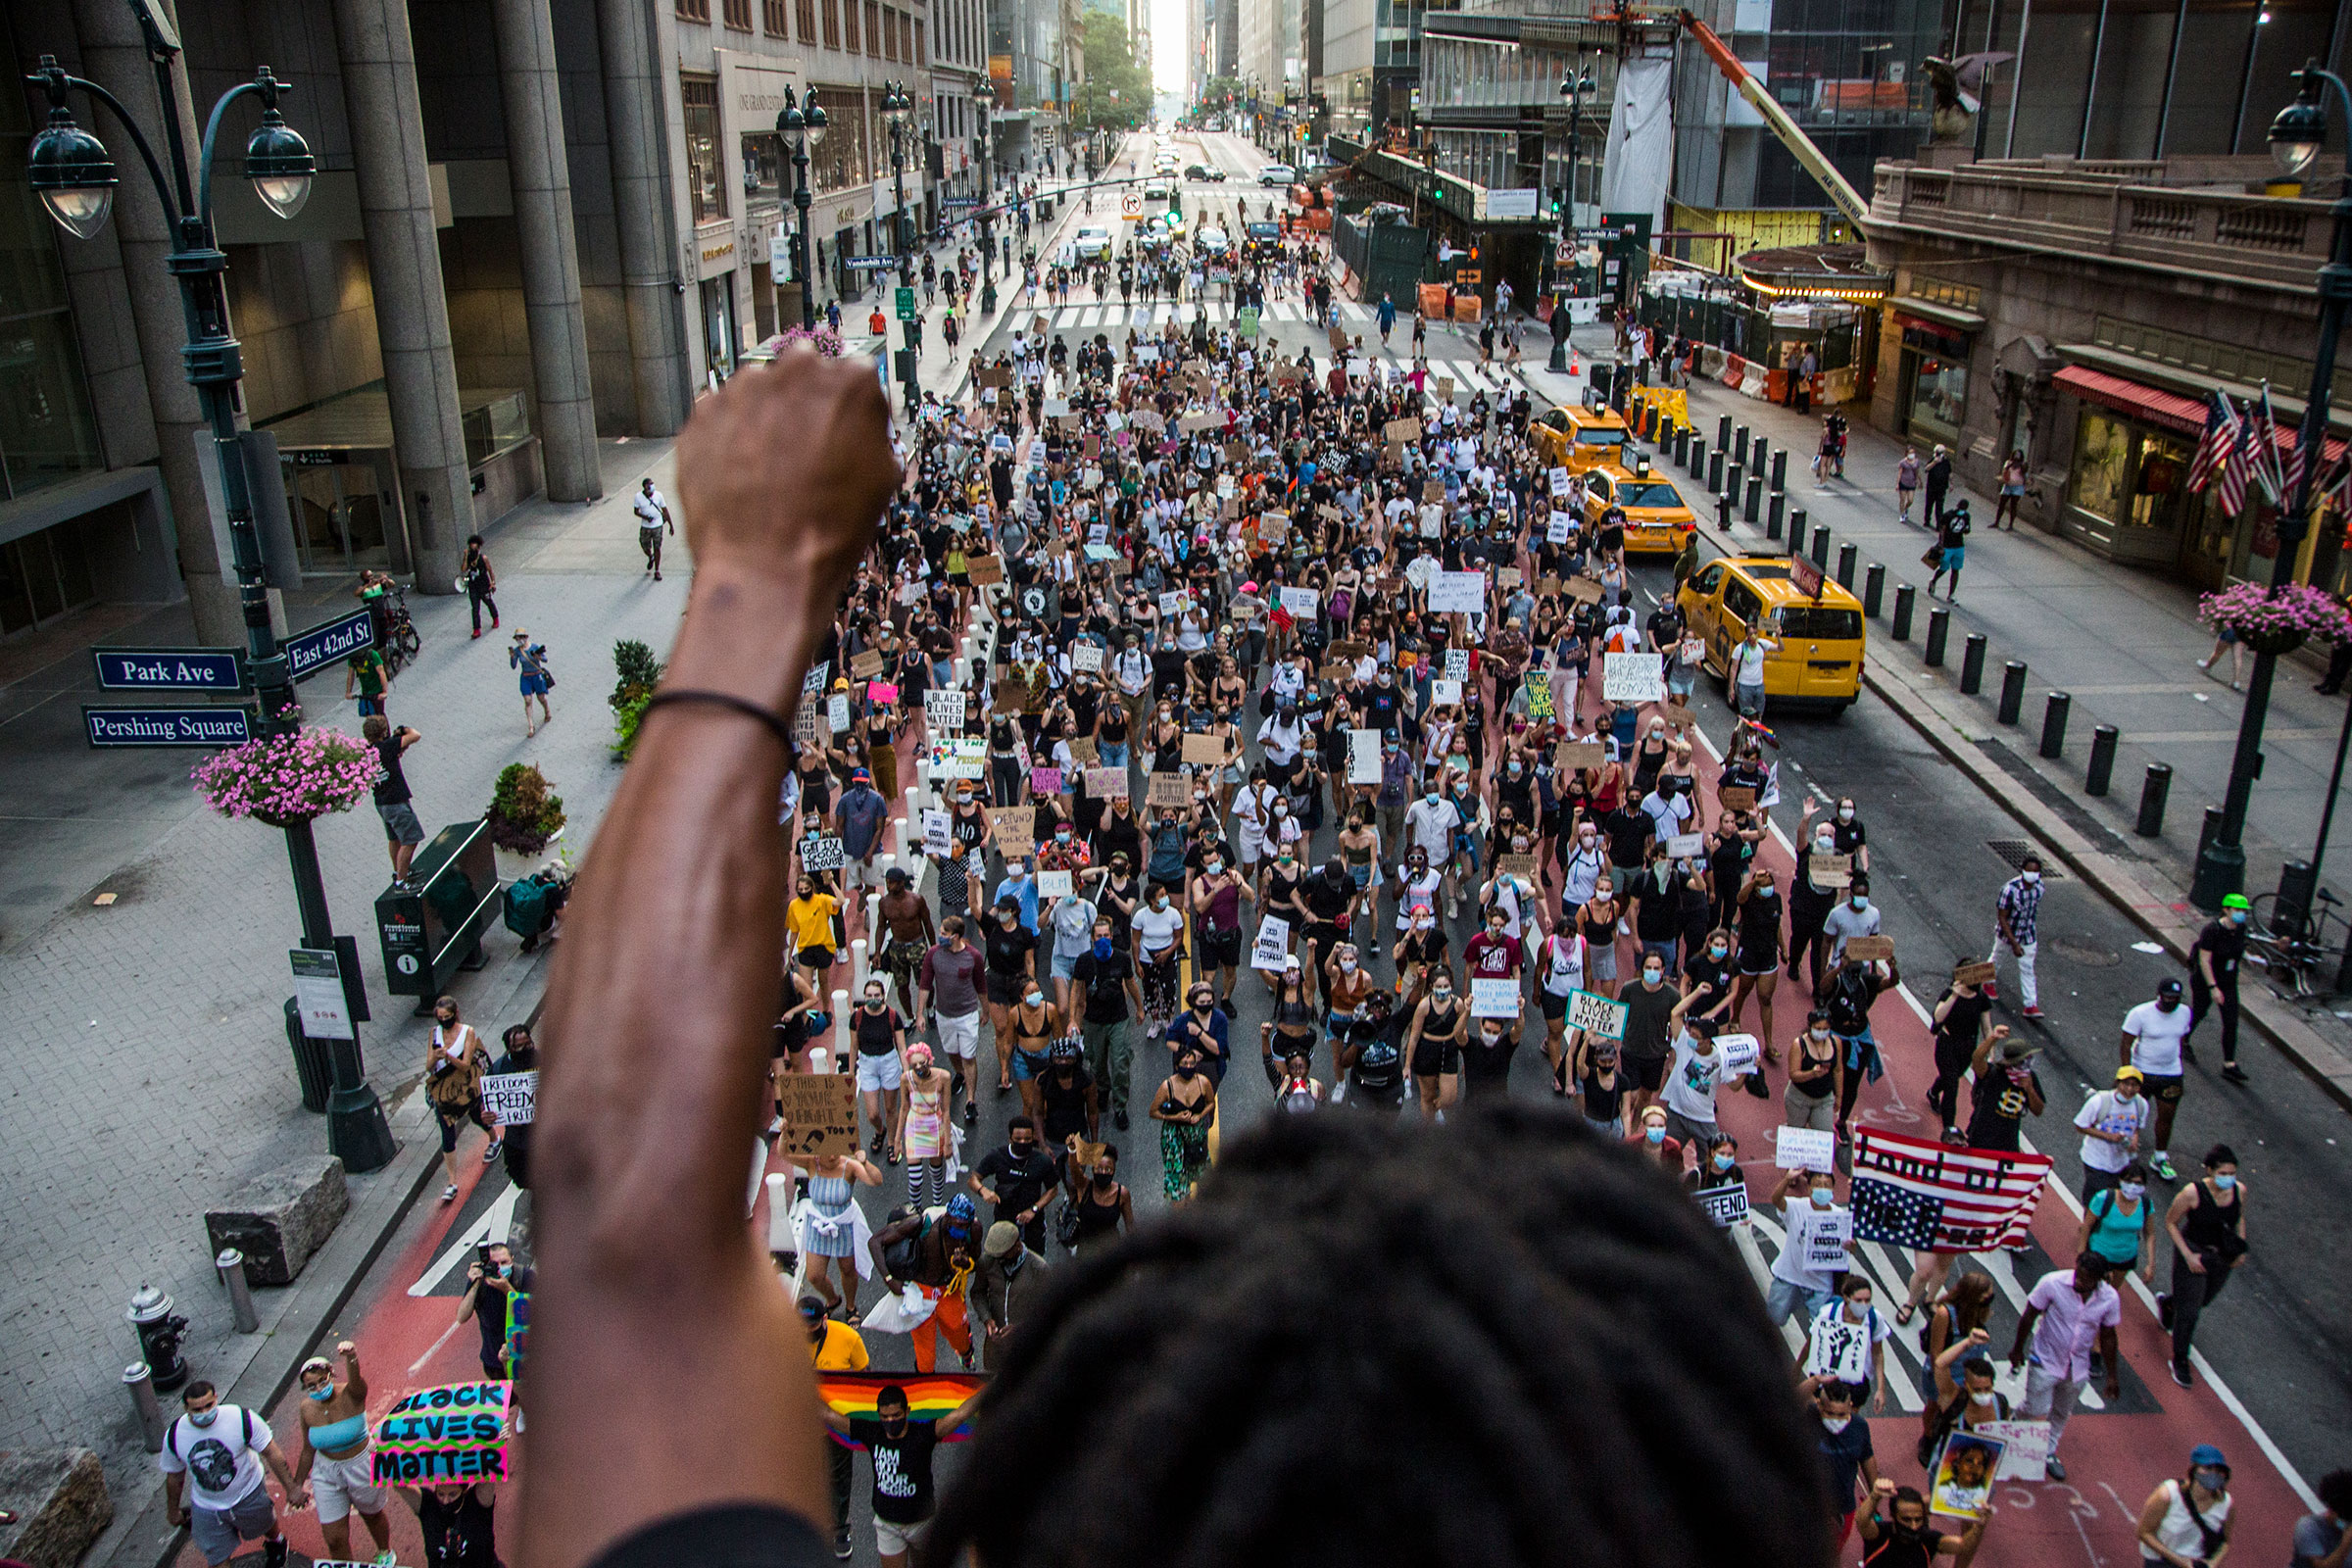 Protesters gathered in Times Square to support "Black Lives Matter" movement